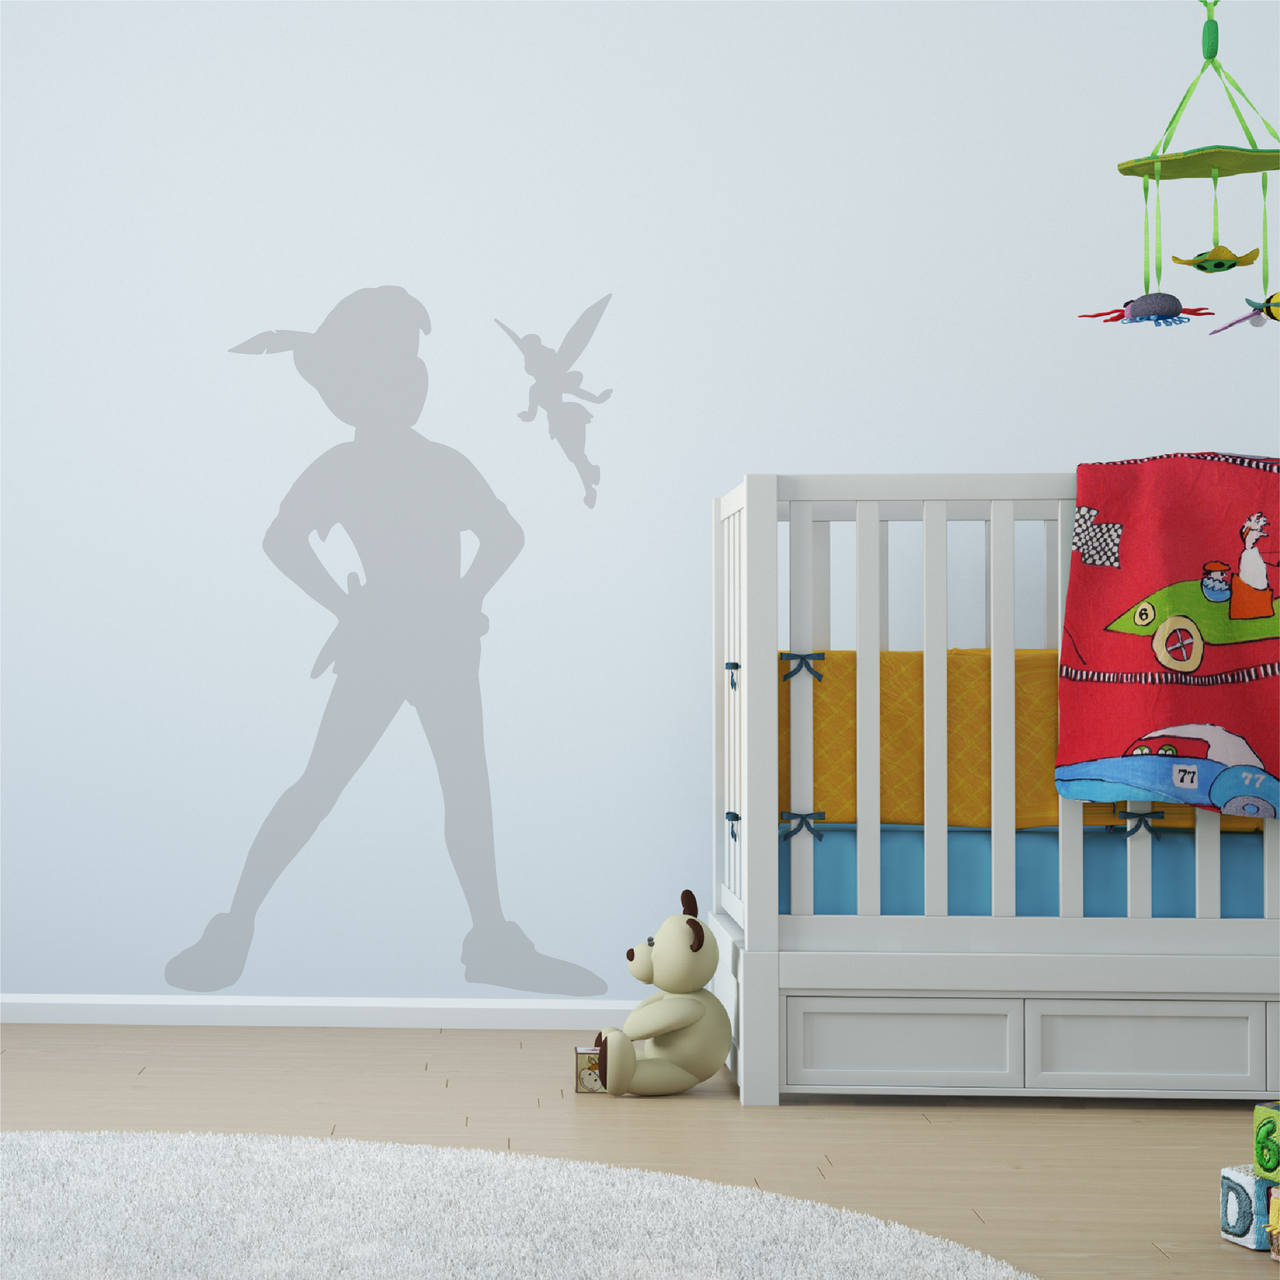 Peter Pan and Tinkerbell Wall Decal